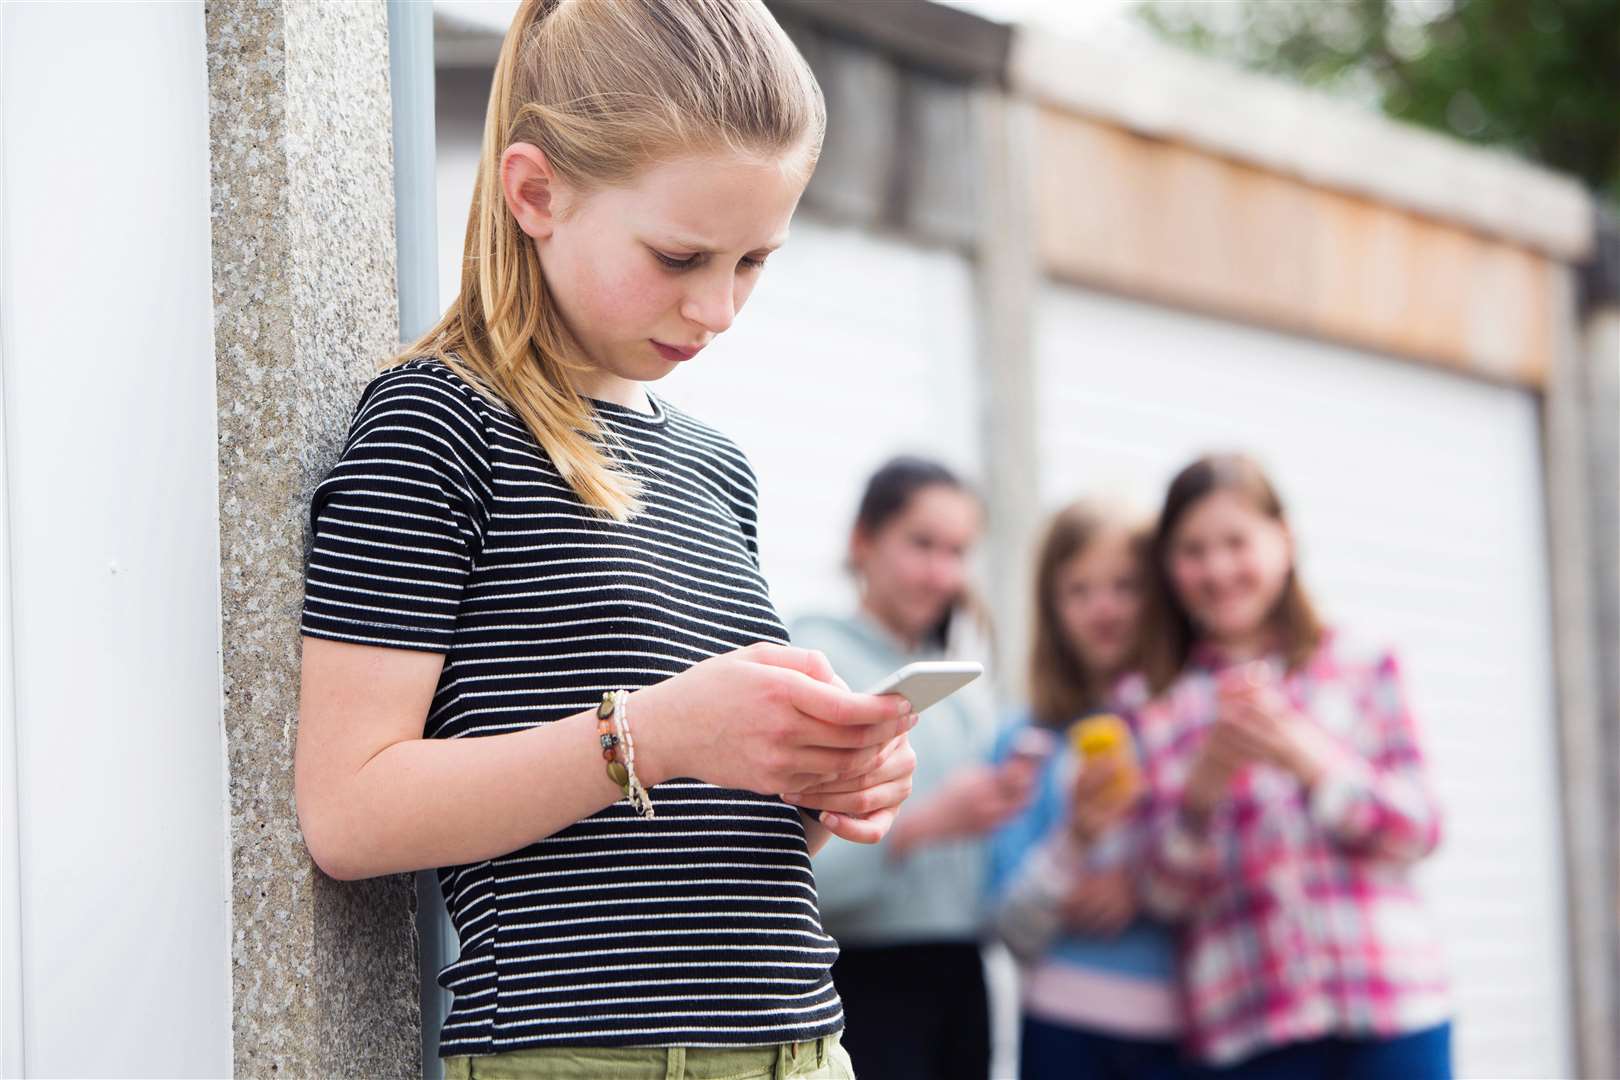 Technology has meant children can now be subject to cyber bullying